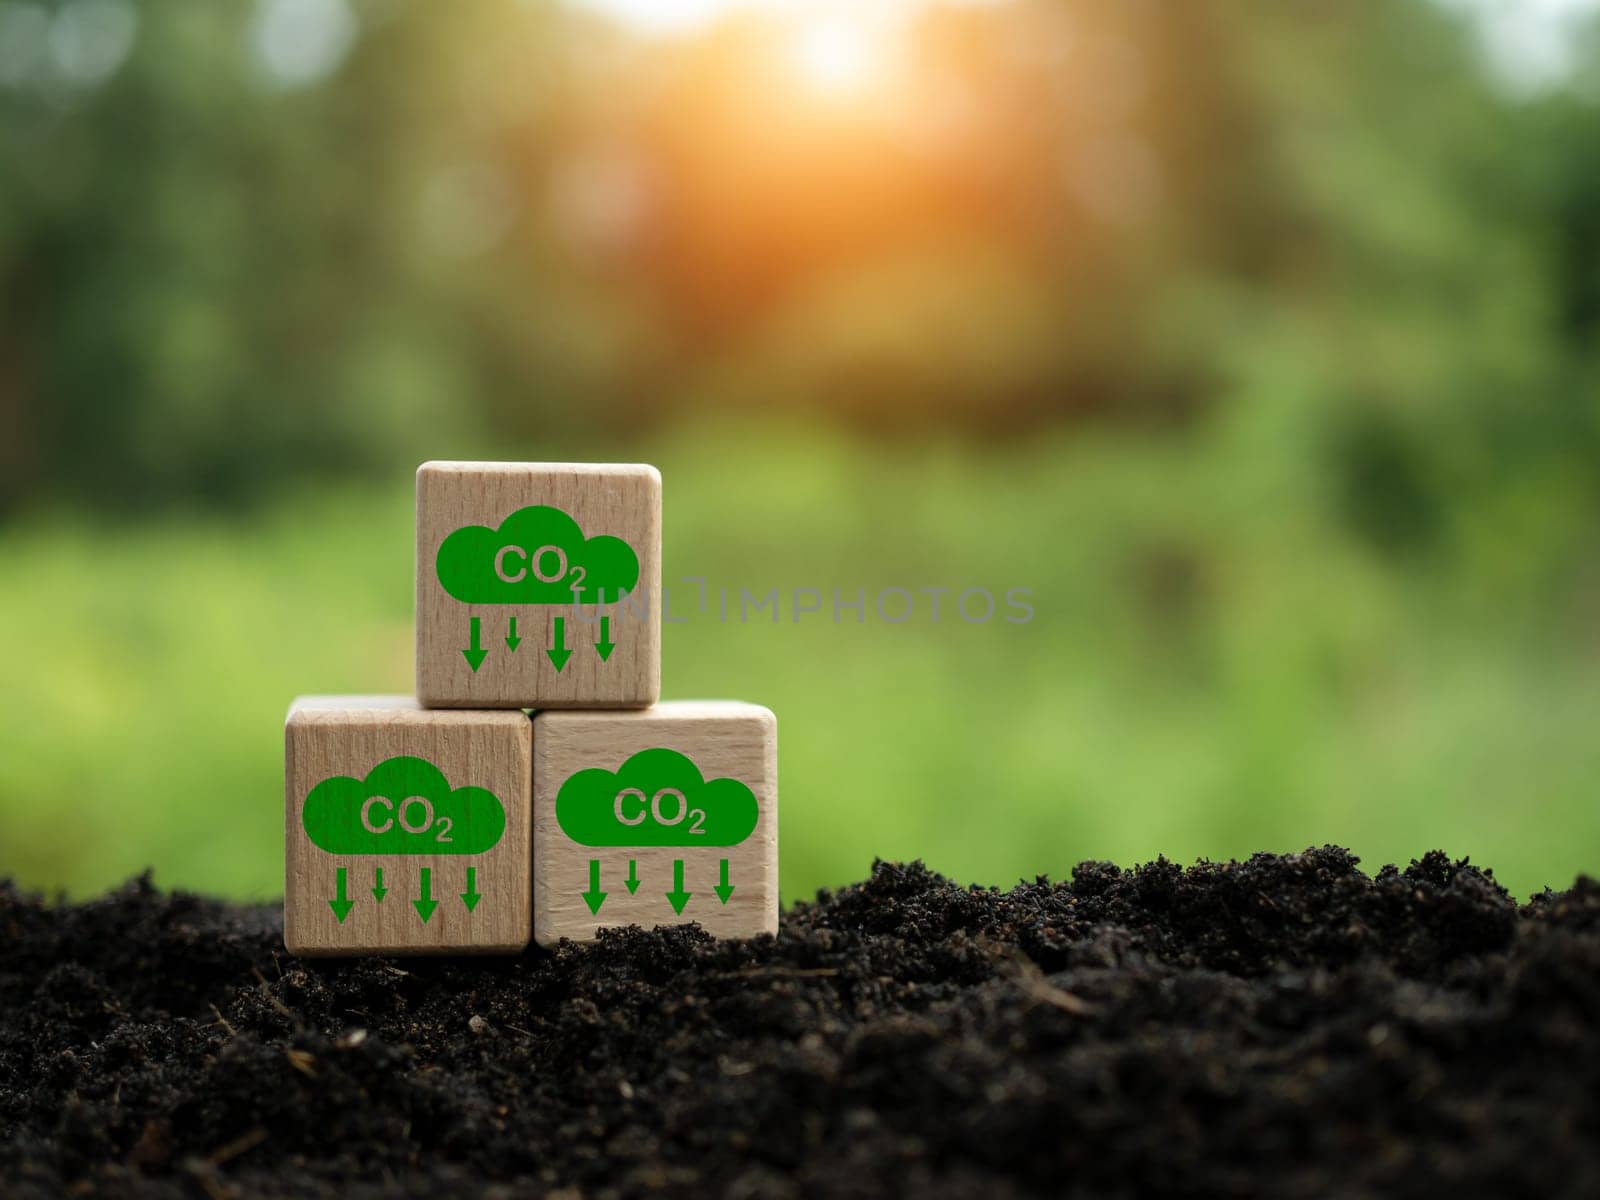 CO2 emission reduction concept, clean and friendly environment without carbon dioxide emissions. Planting trees to reduce CO2 emissions, environmental protection concept.